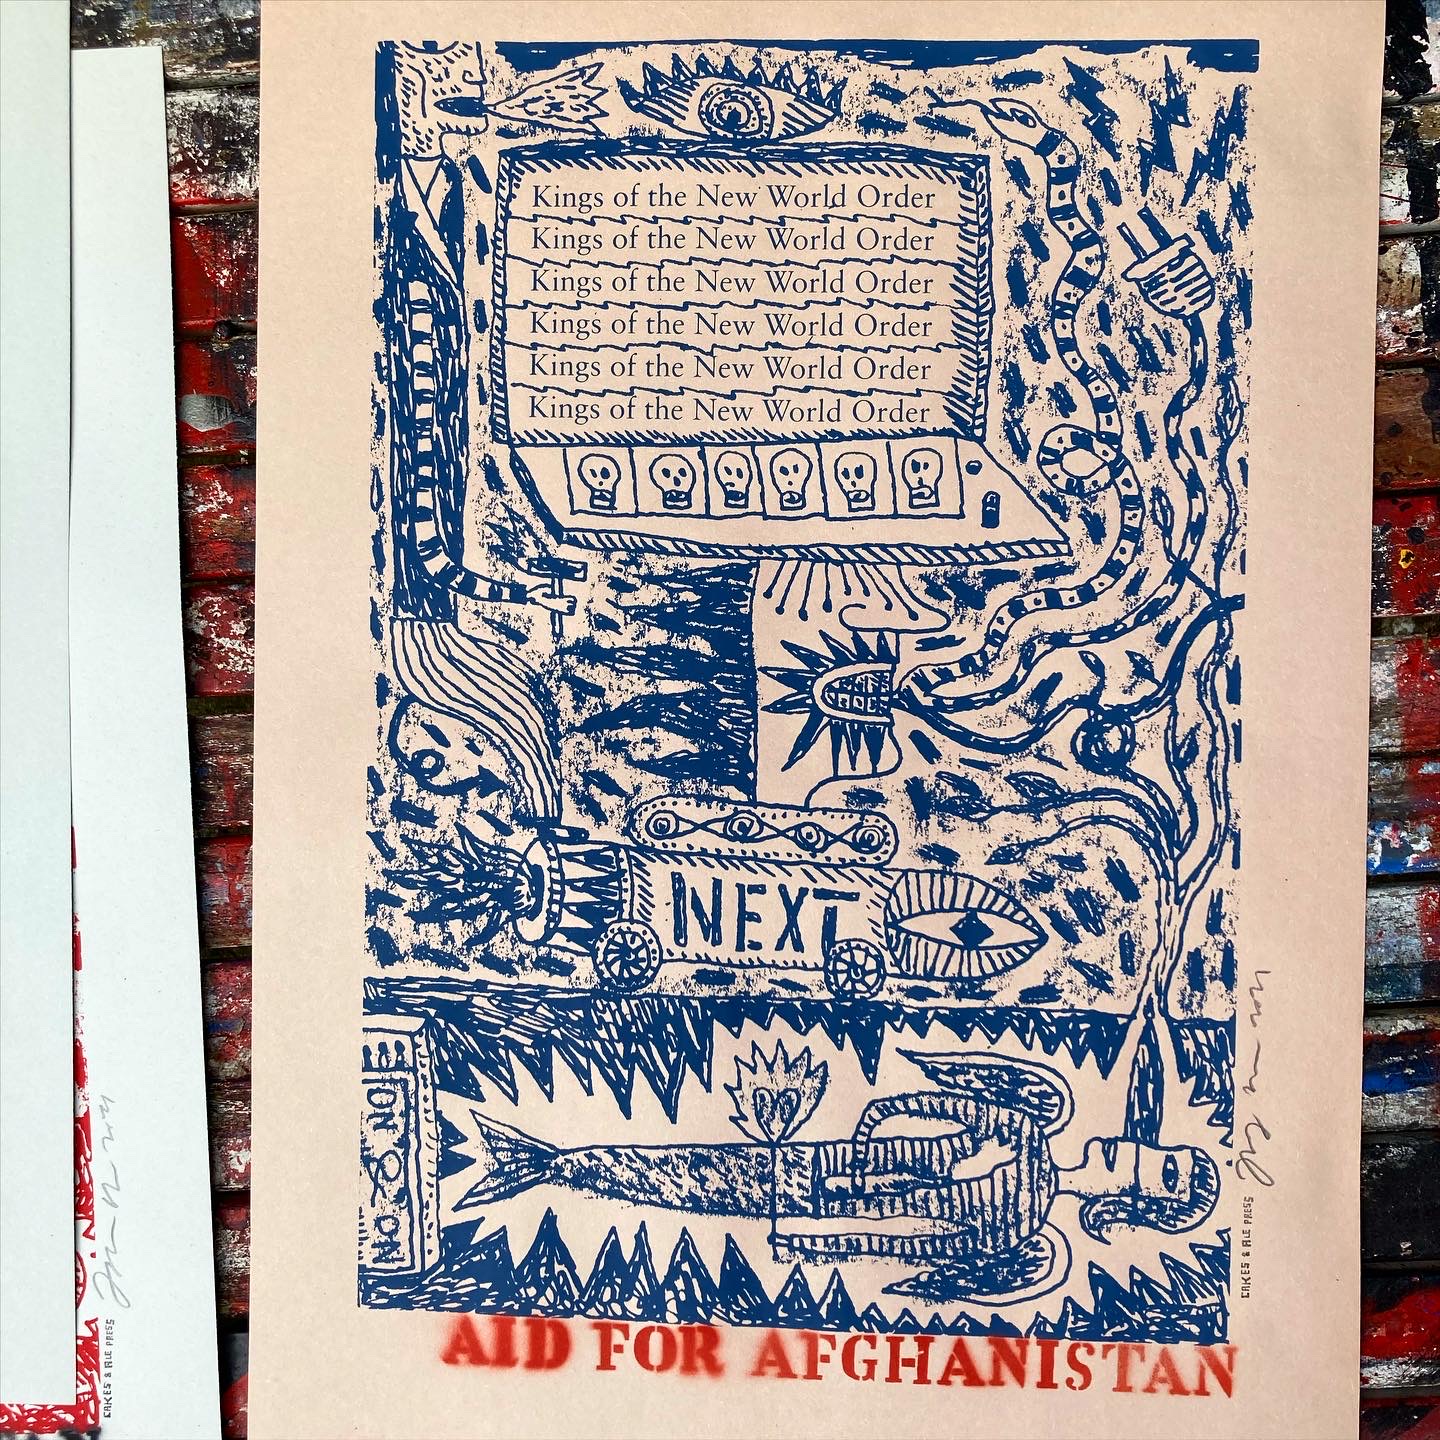 Image shows screenprint raised by Jonny for Afghanistan appeal 